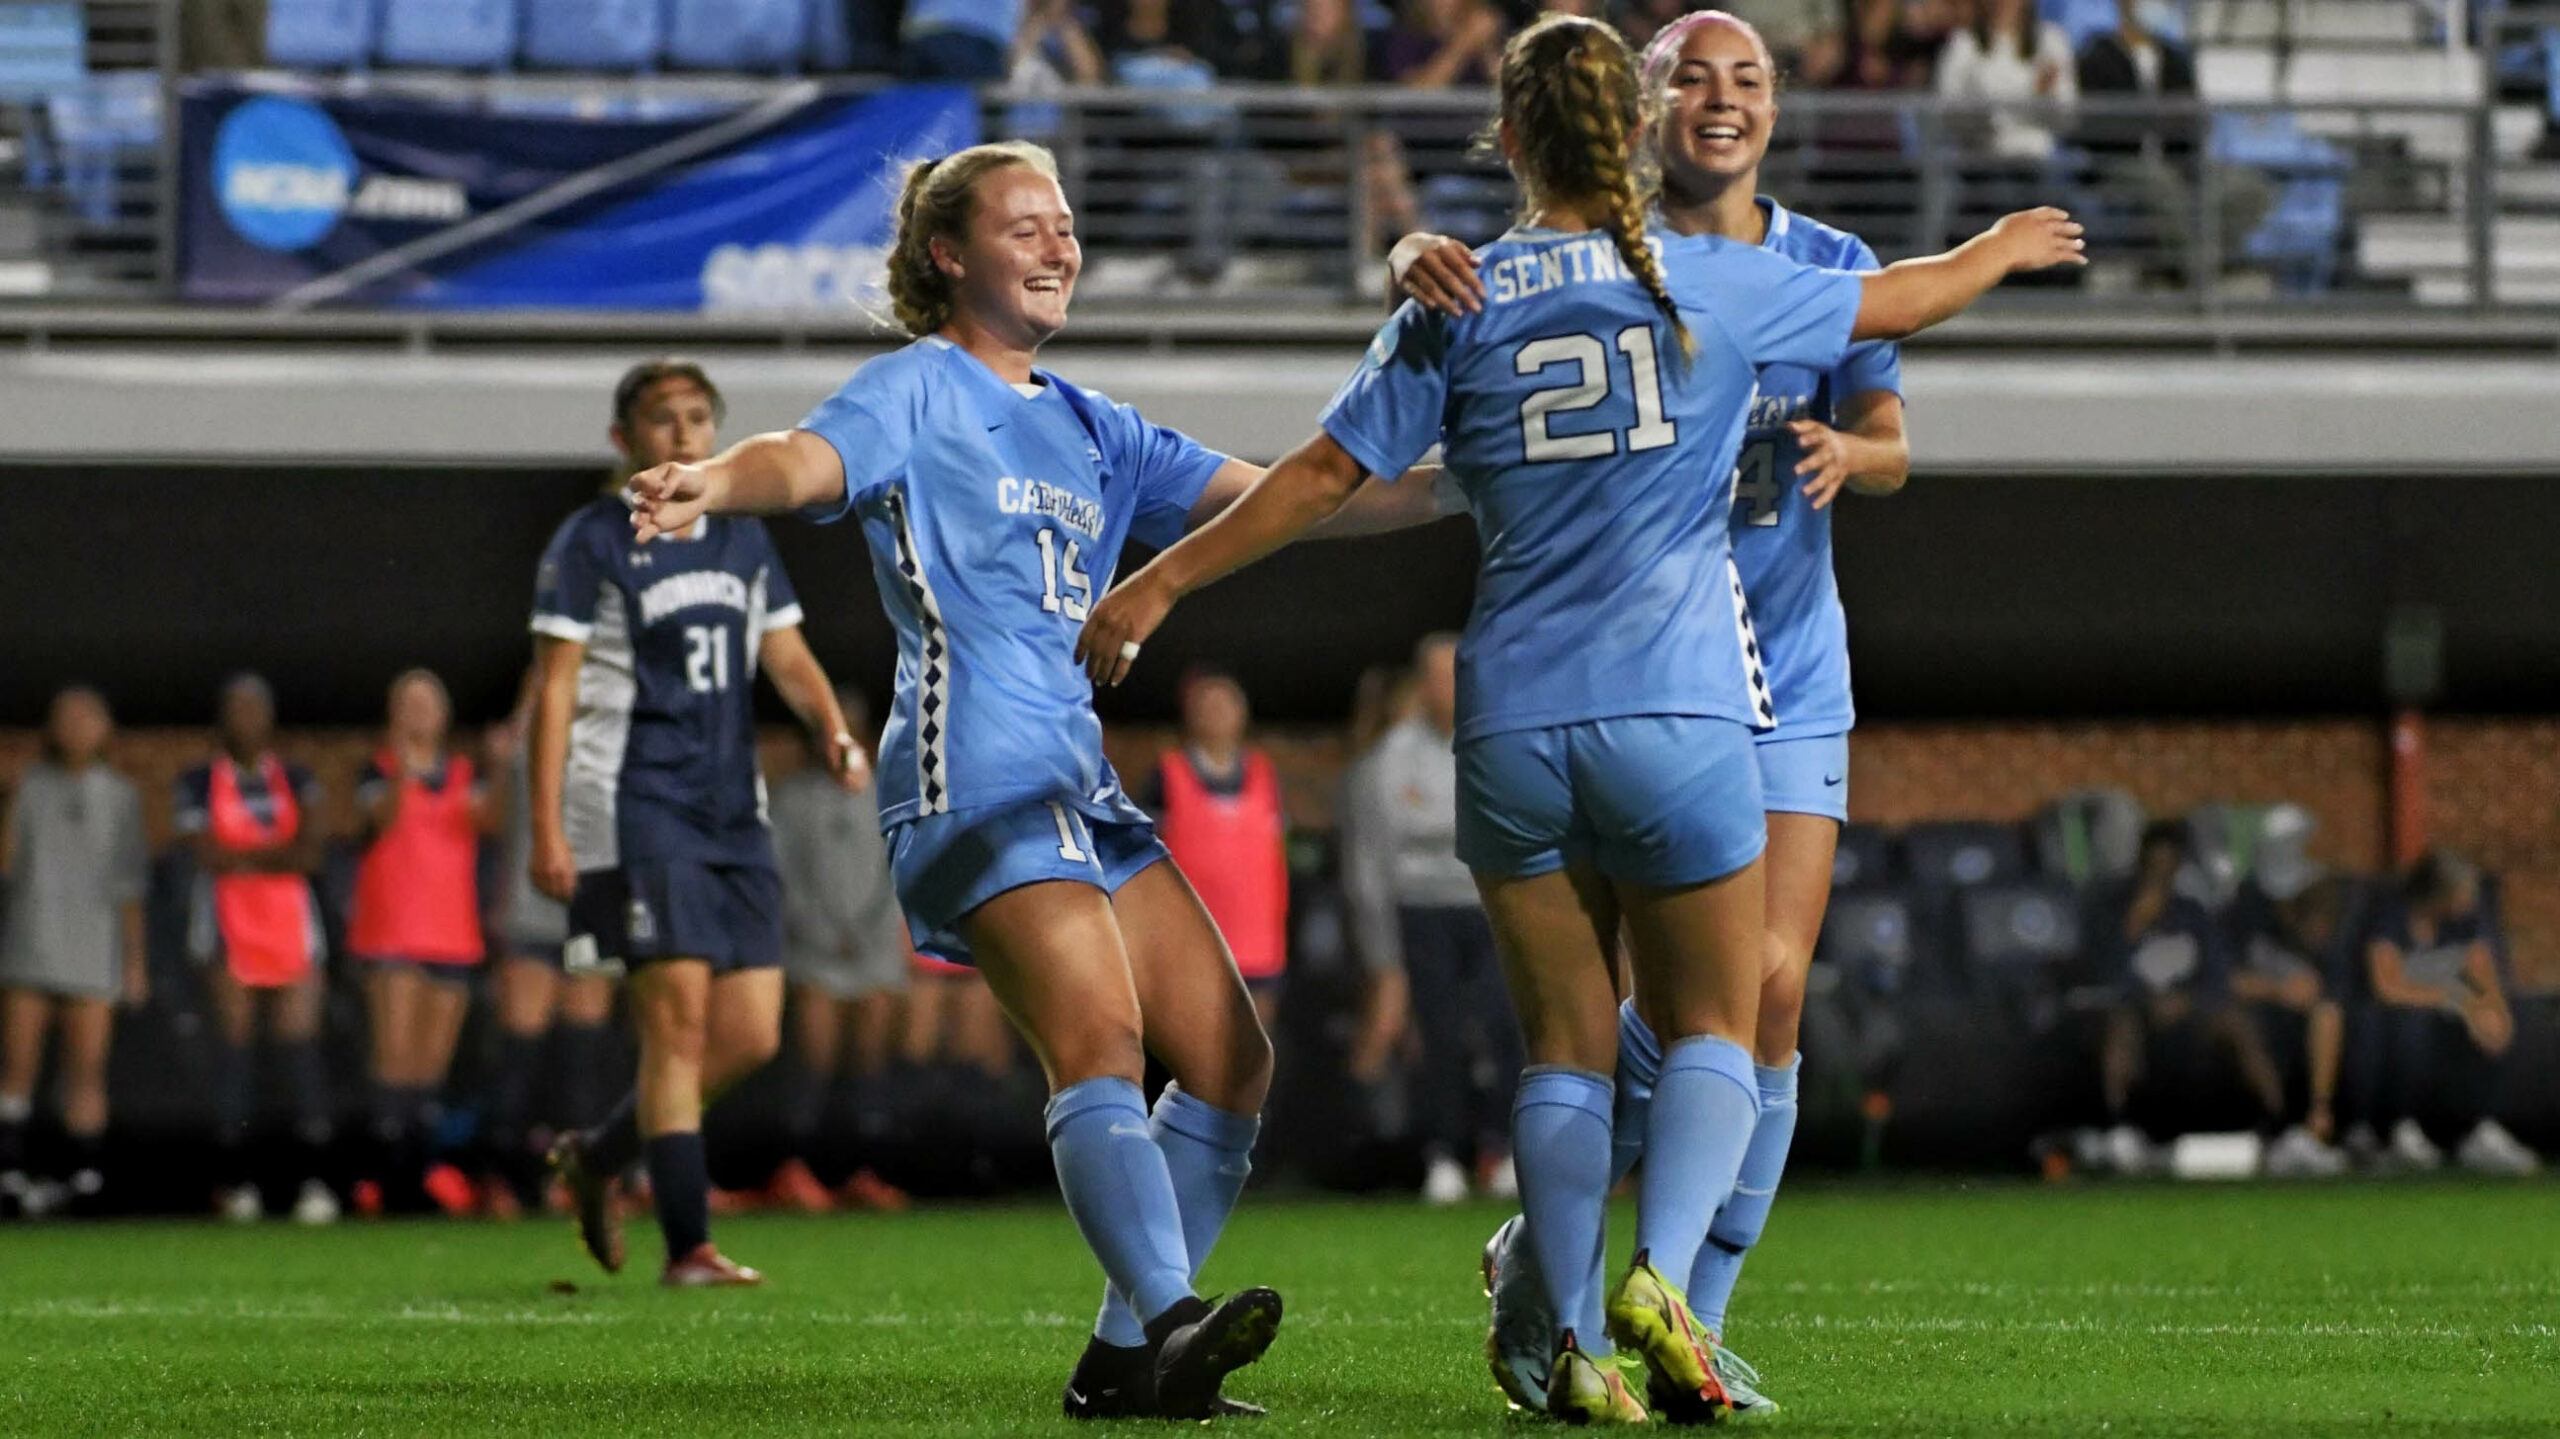 UNC Women's Soccer Blasts Old Dominion in NCAA Tournament